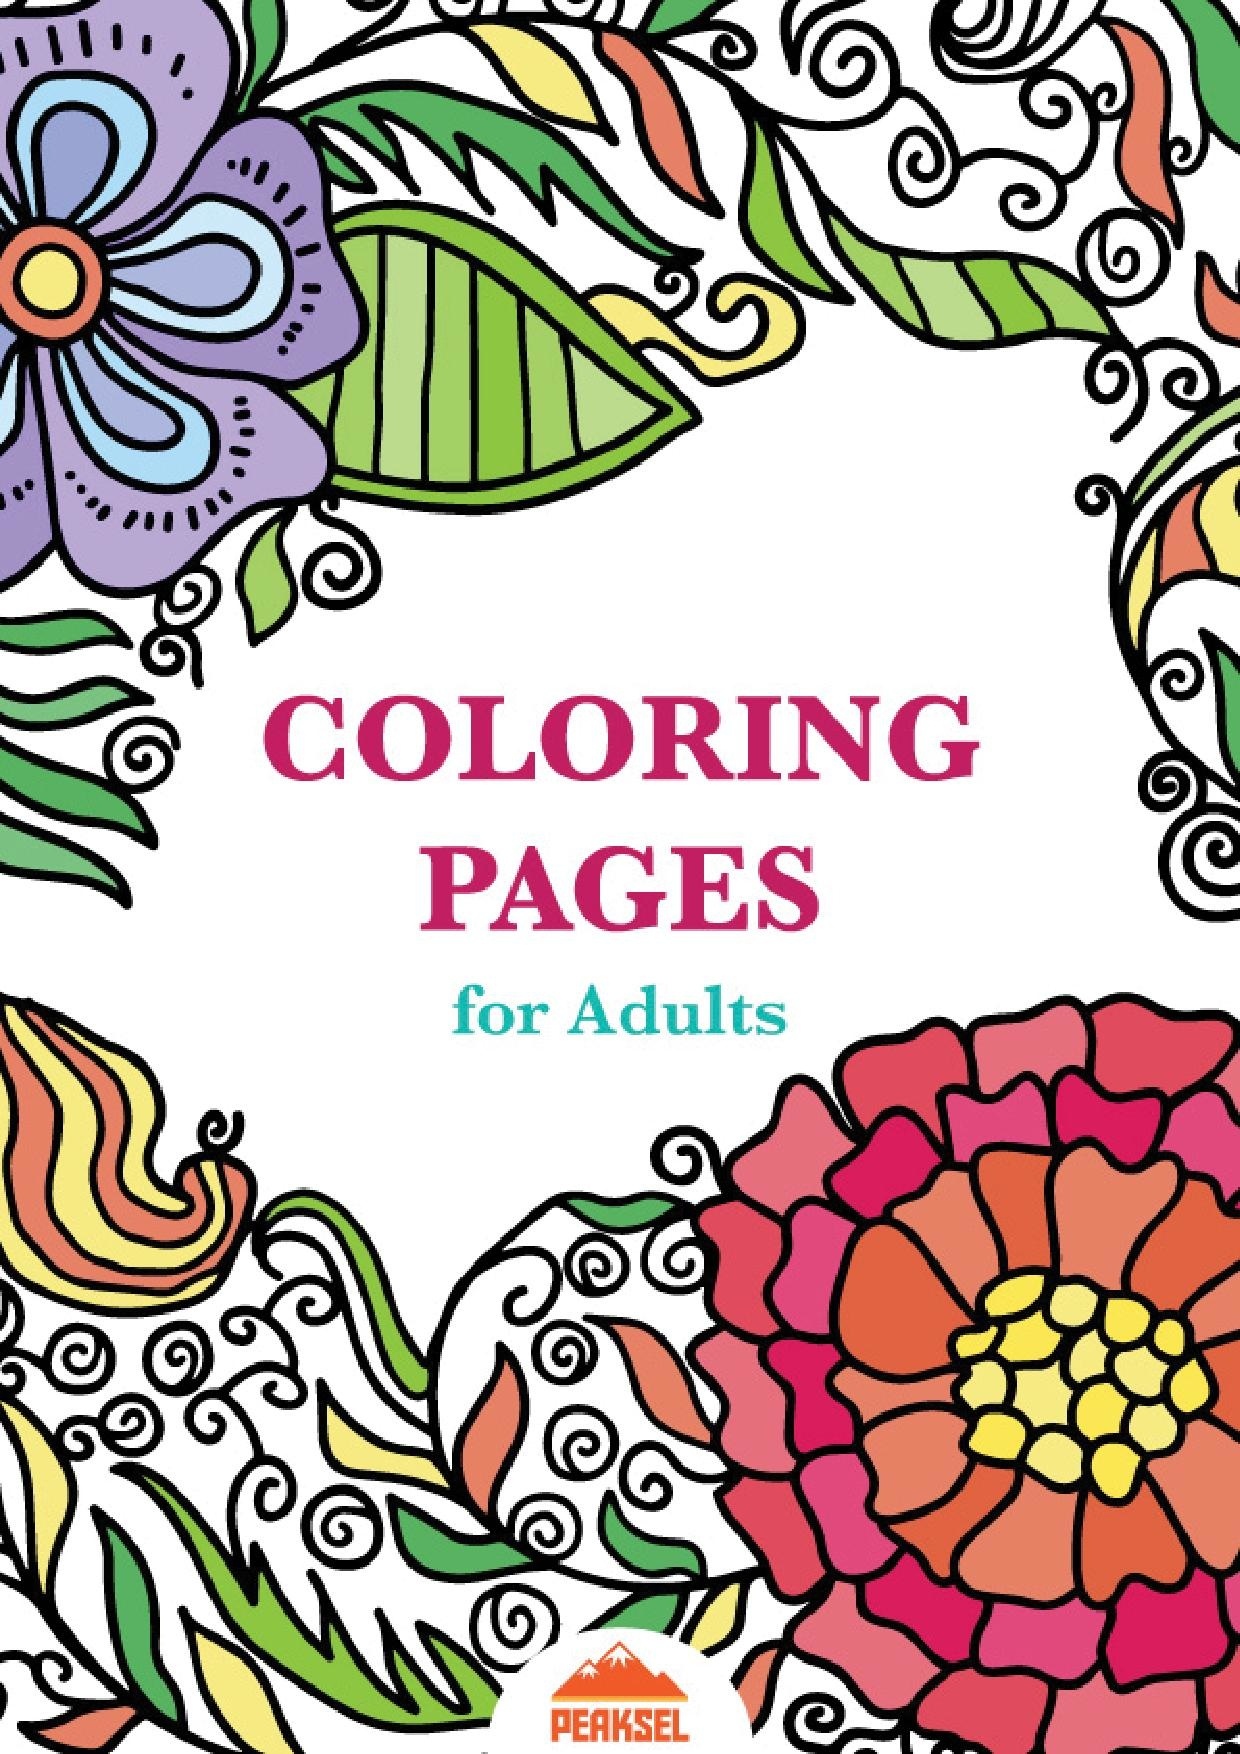 File:printable Coloring Pages For Adults - Free Adult Coloring Book - Free Printable Coloring Book Pages For Adults